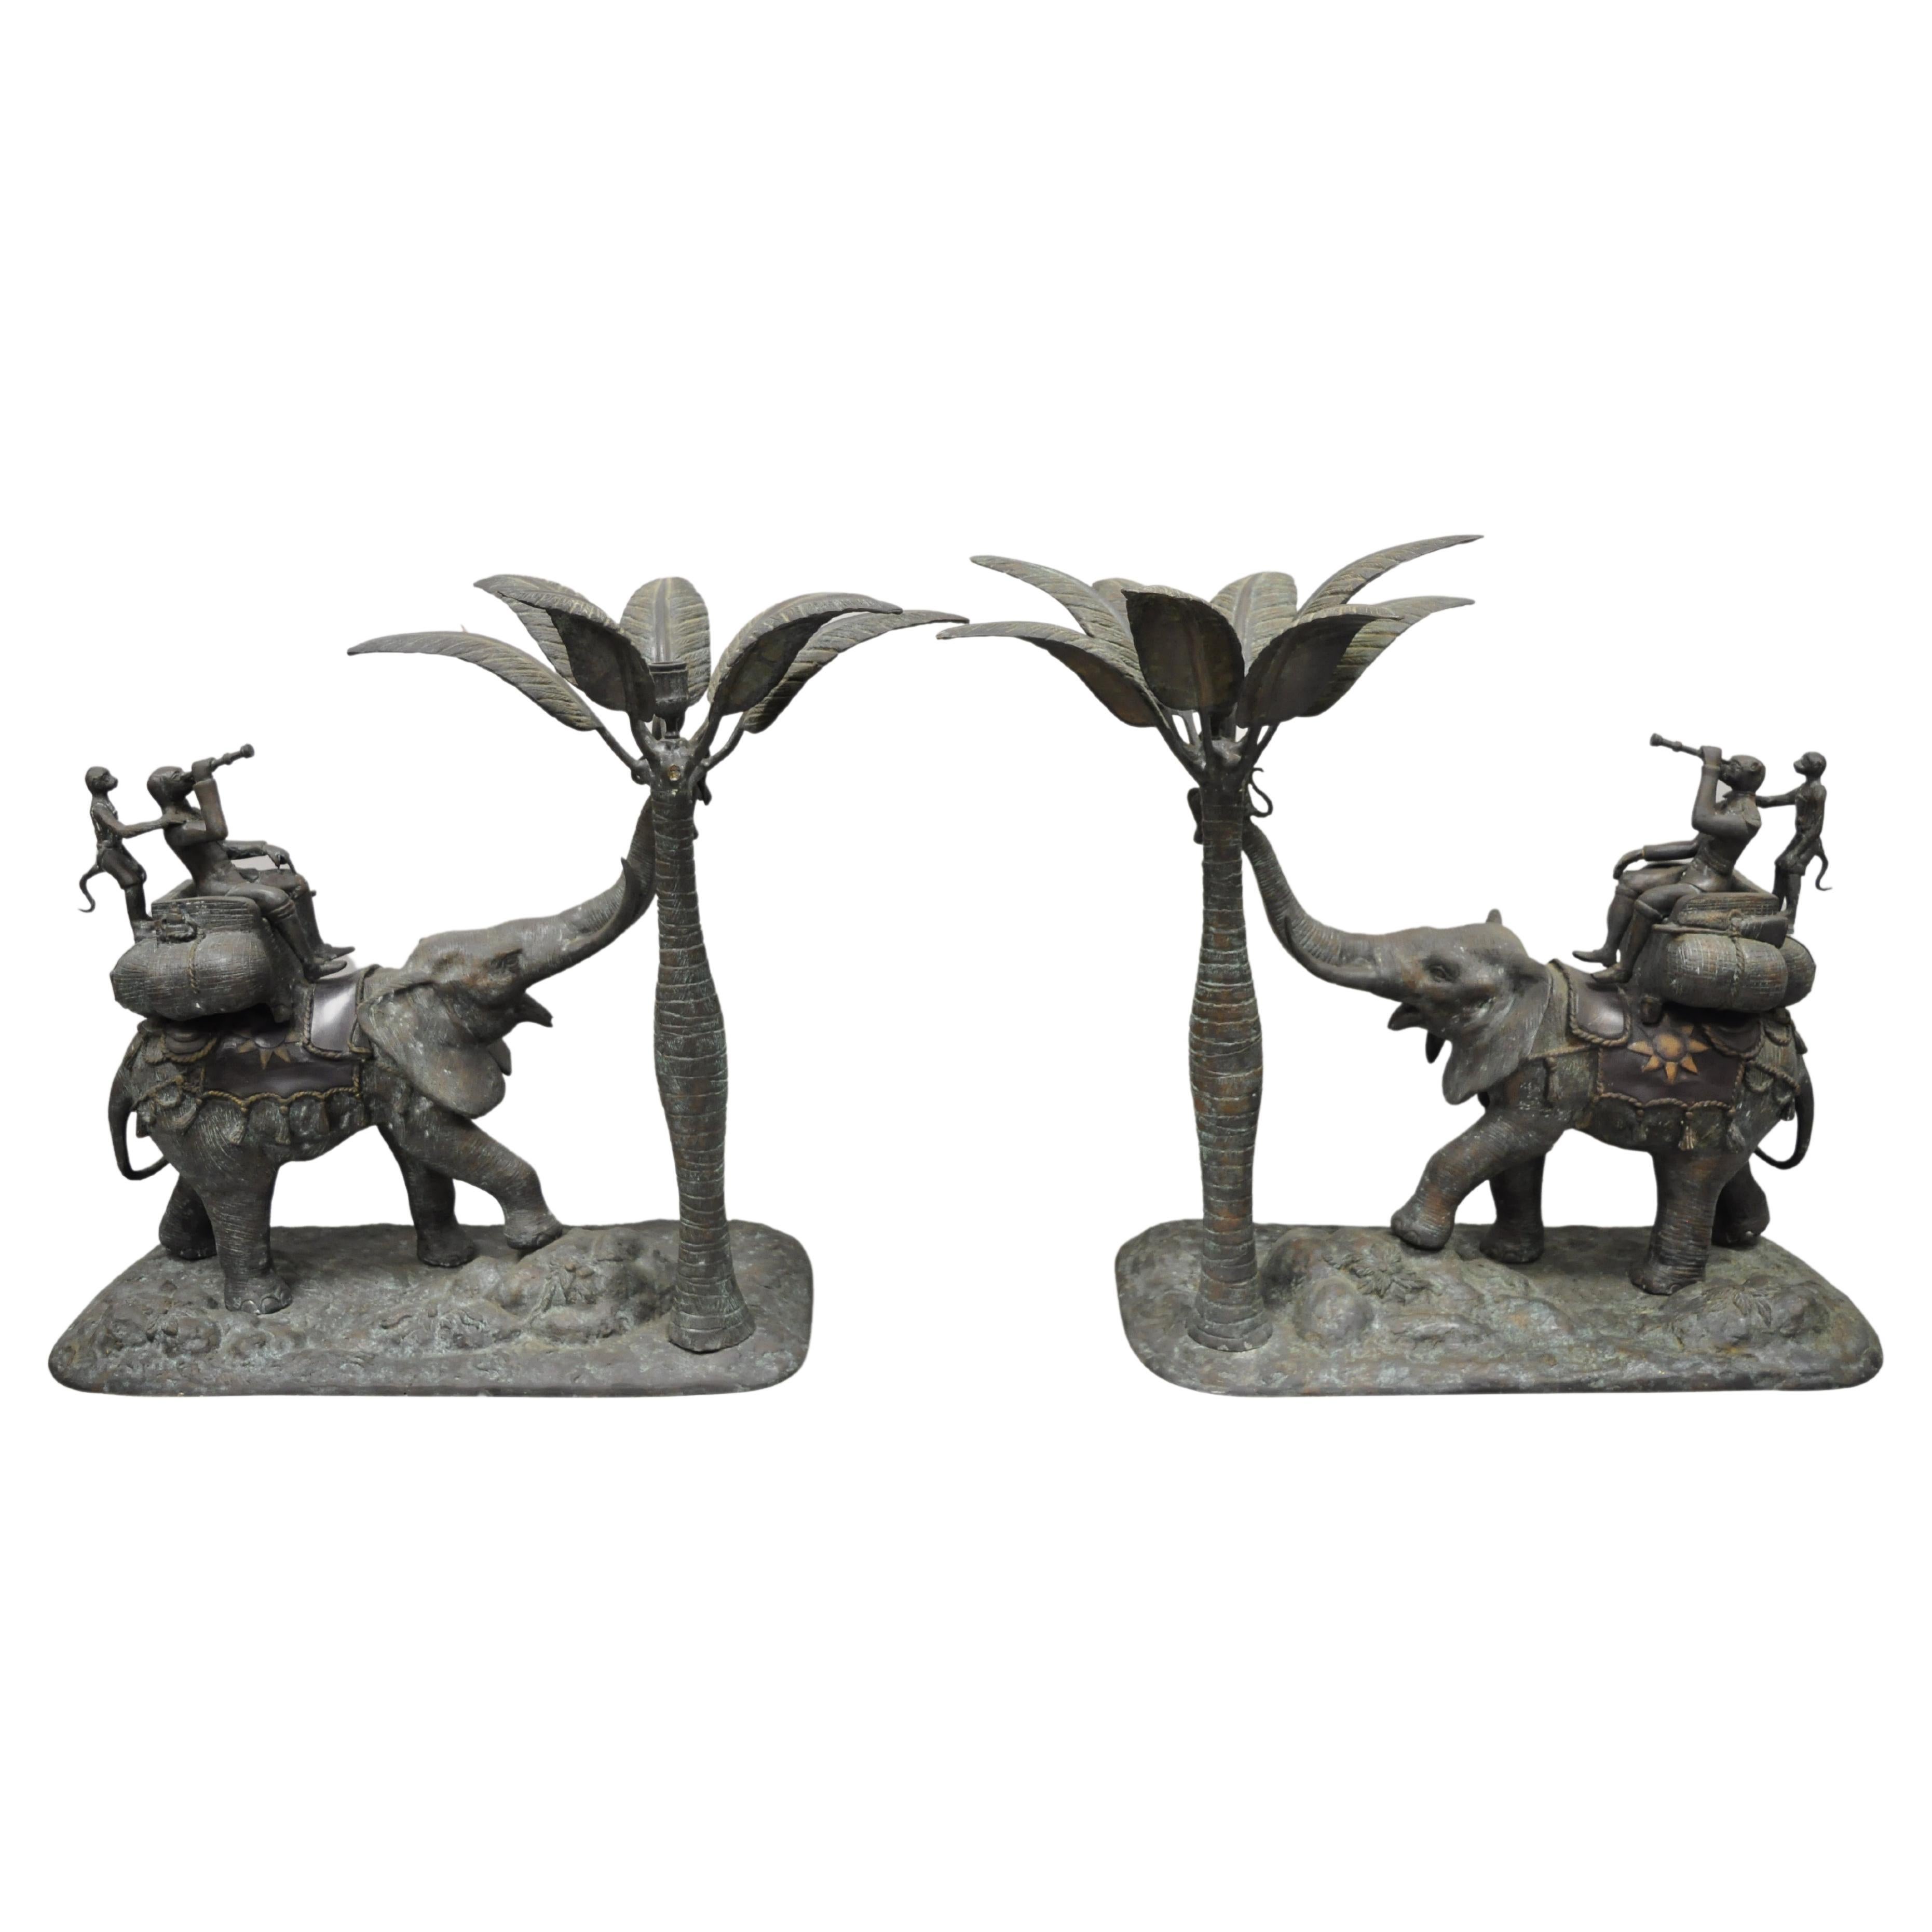 Maitland Smith Bronze Monkey Elephant Palm Tree Sculpture Candle Holder, a Pair For Sale